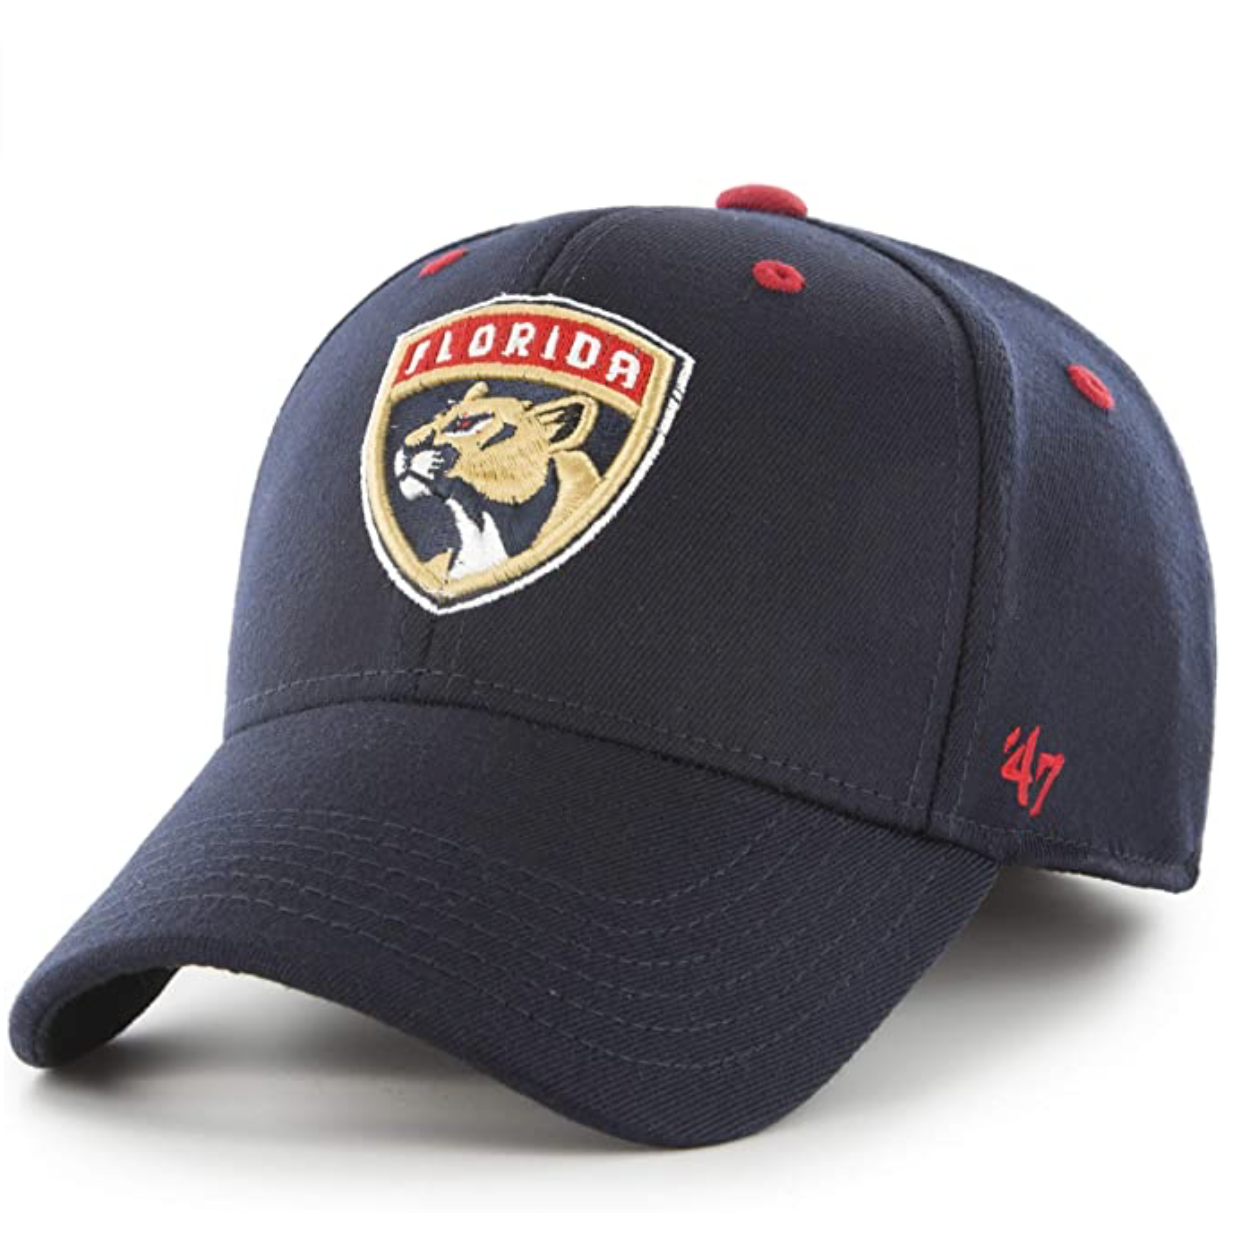 '47 Brand - NHL Florida Panther - One Size Fits All Stretch Cap